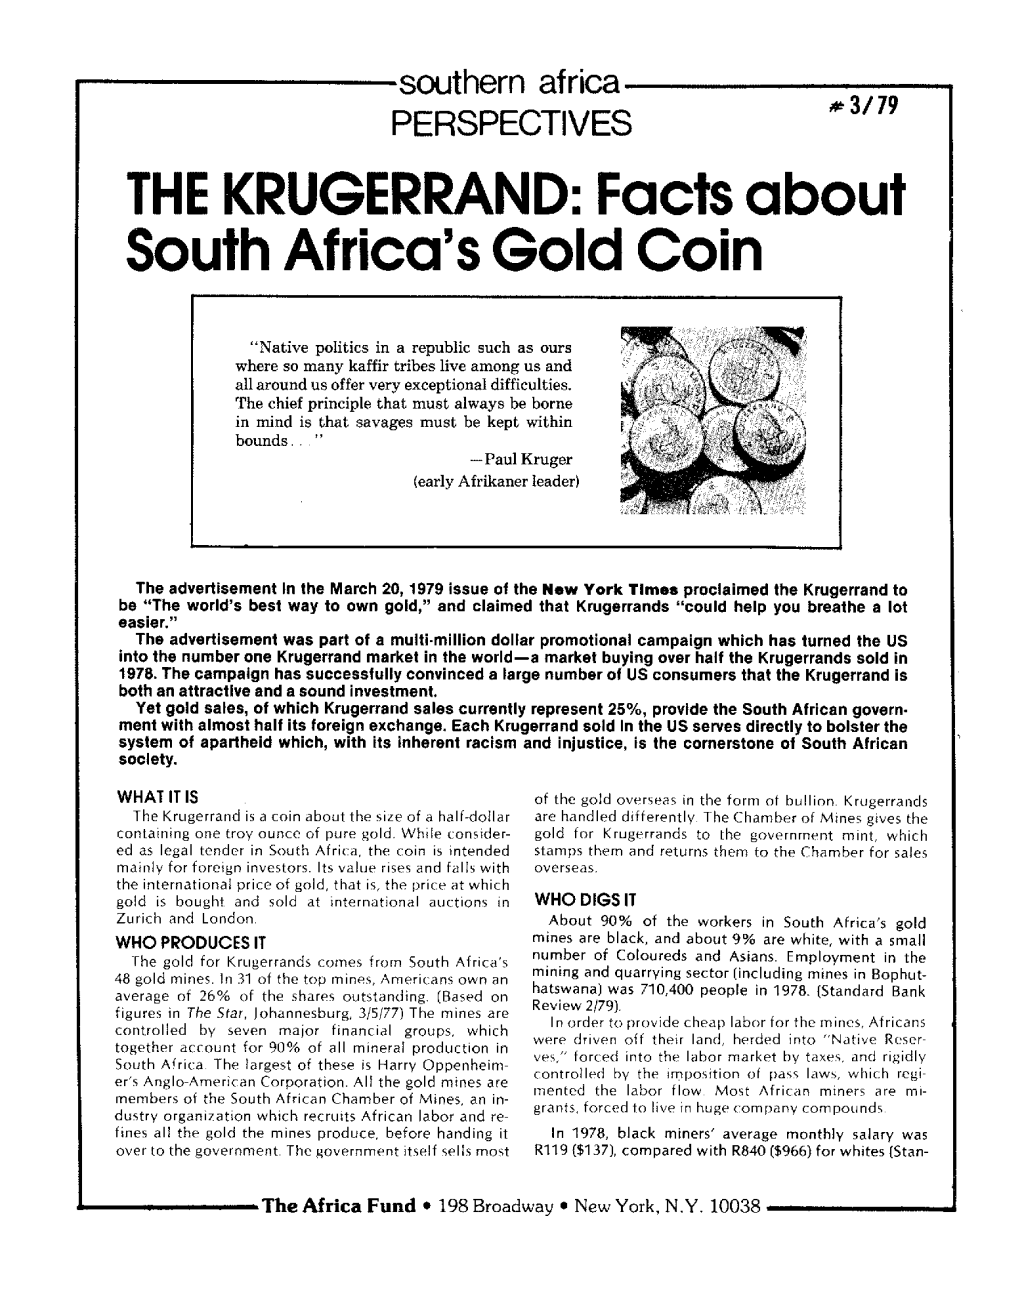 THE KRUGERRAND: Facts About South Africa's Gold Coin